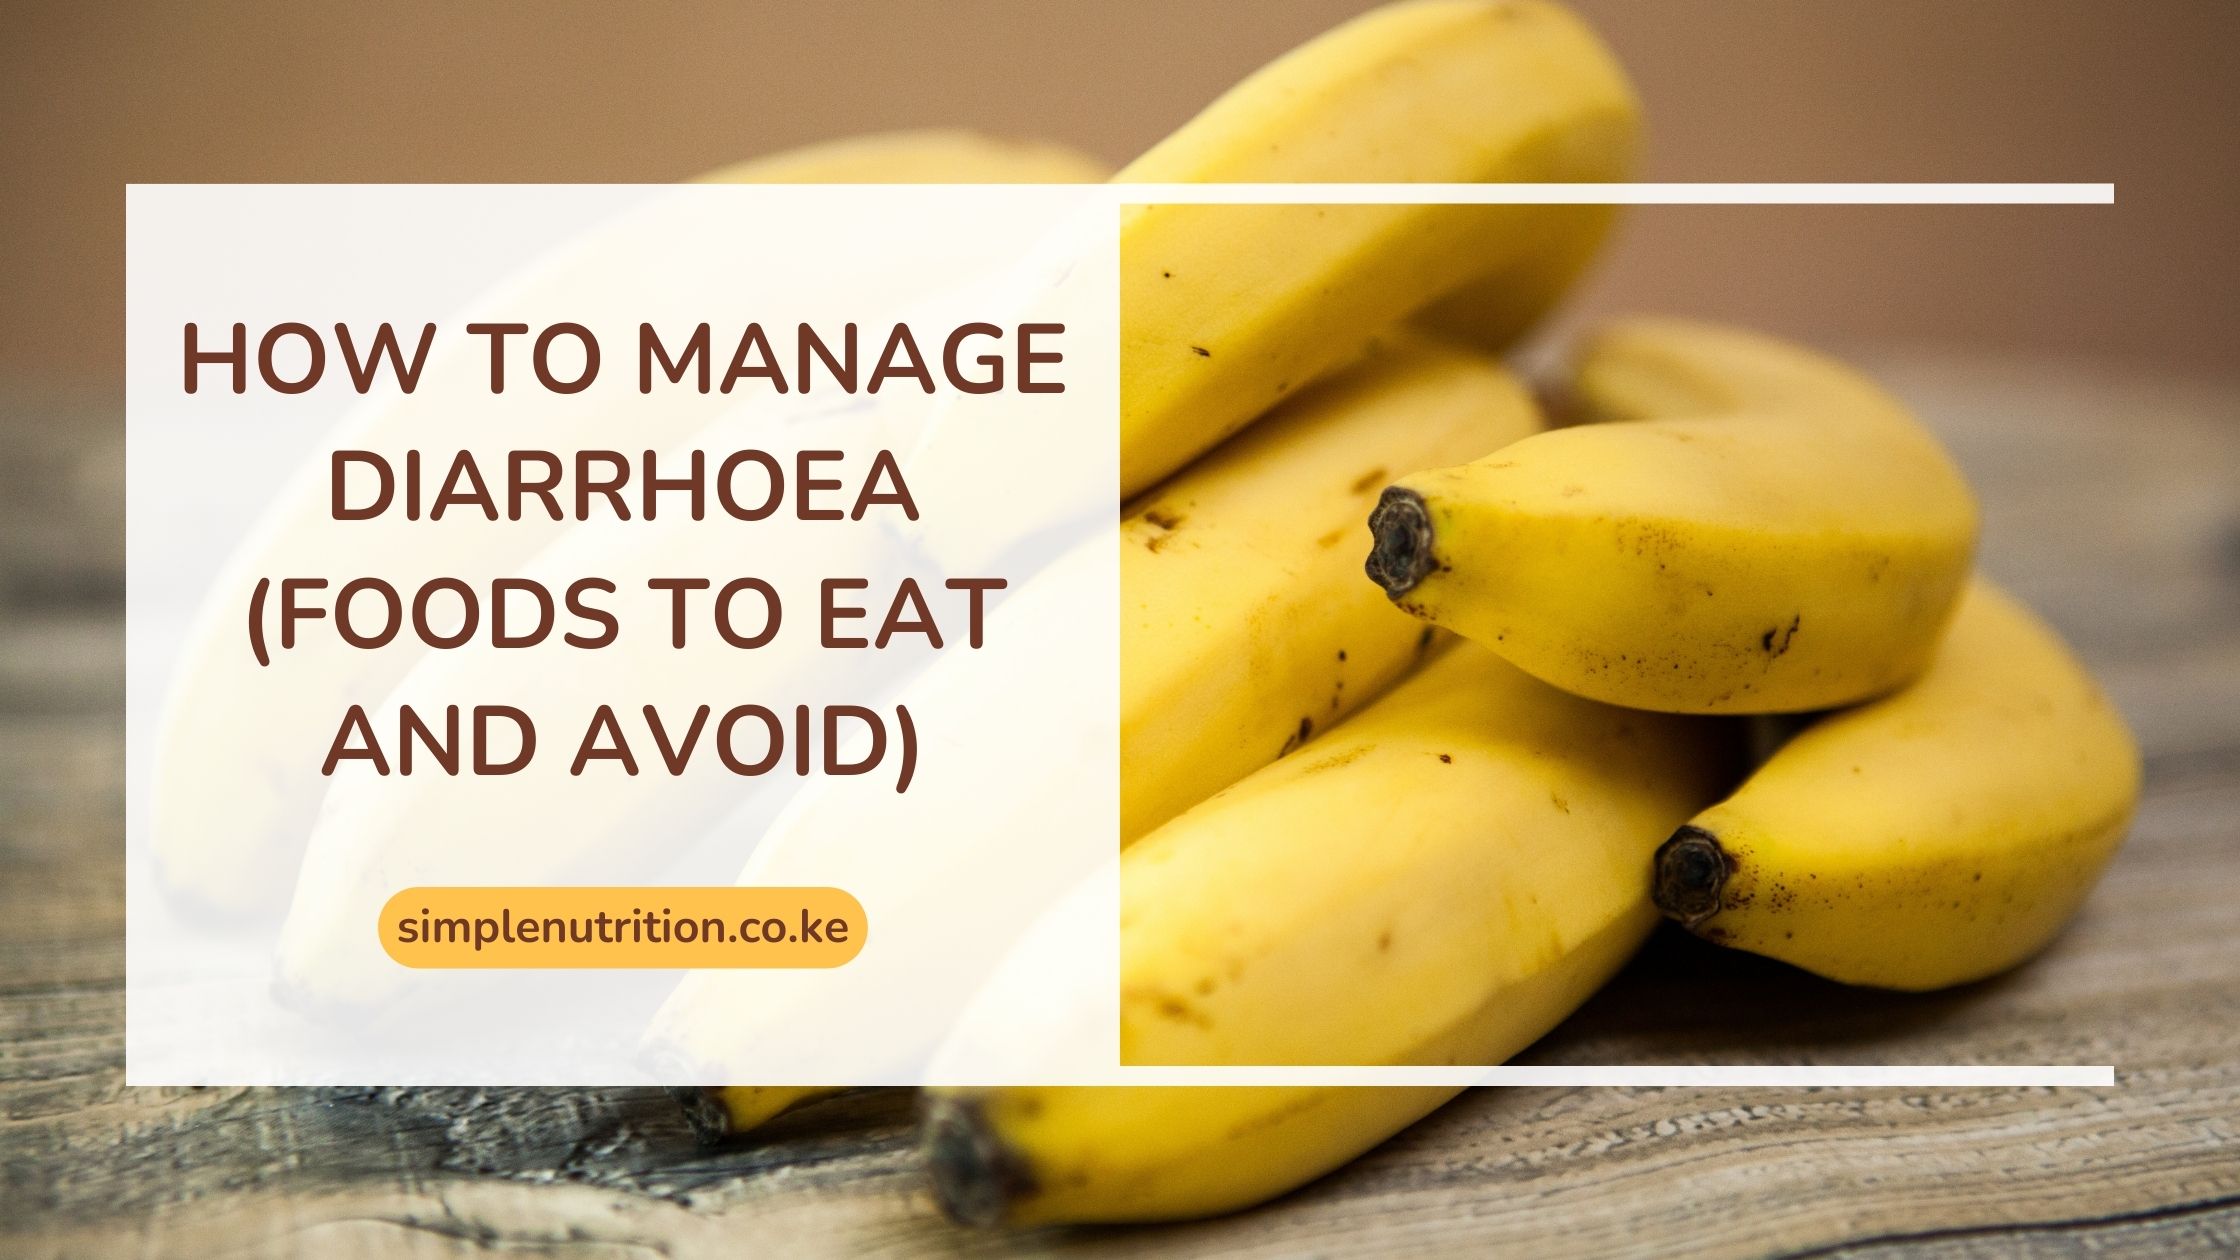 How To Manage Diarrhoea (Foods To Eat and Avoid)